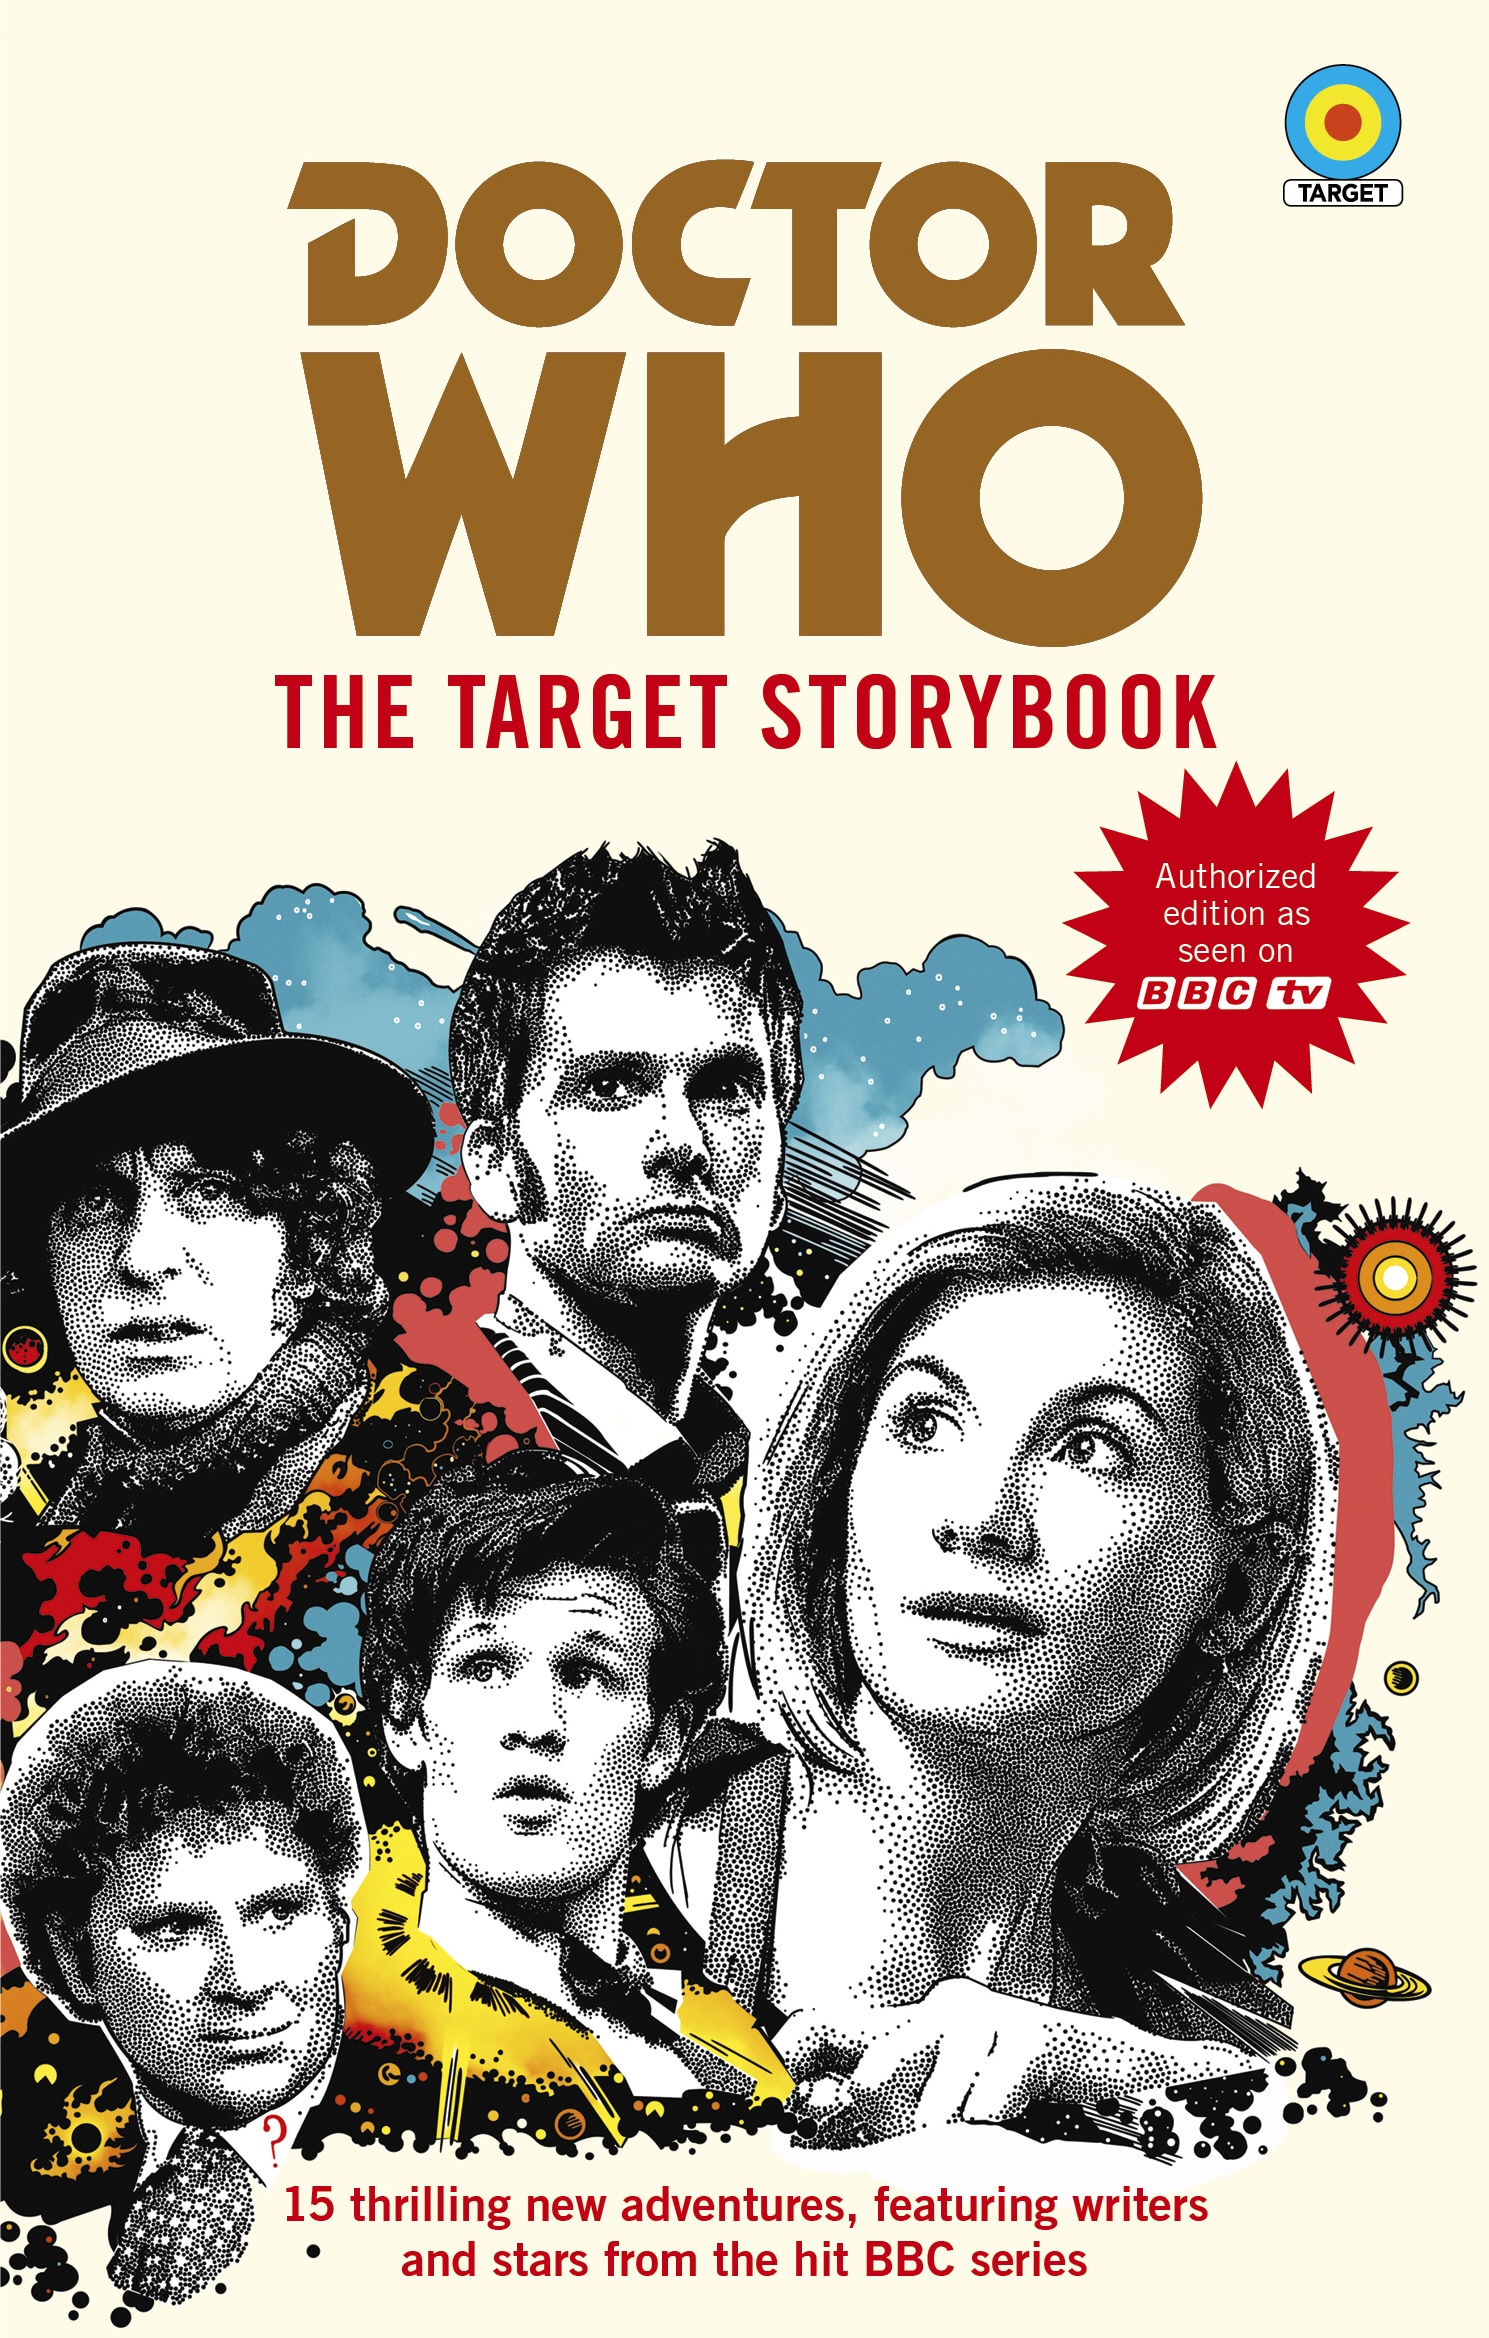 Book “Doctor Who: The Target Storybook” by Terrance Dicks — September 24, 2020